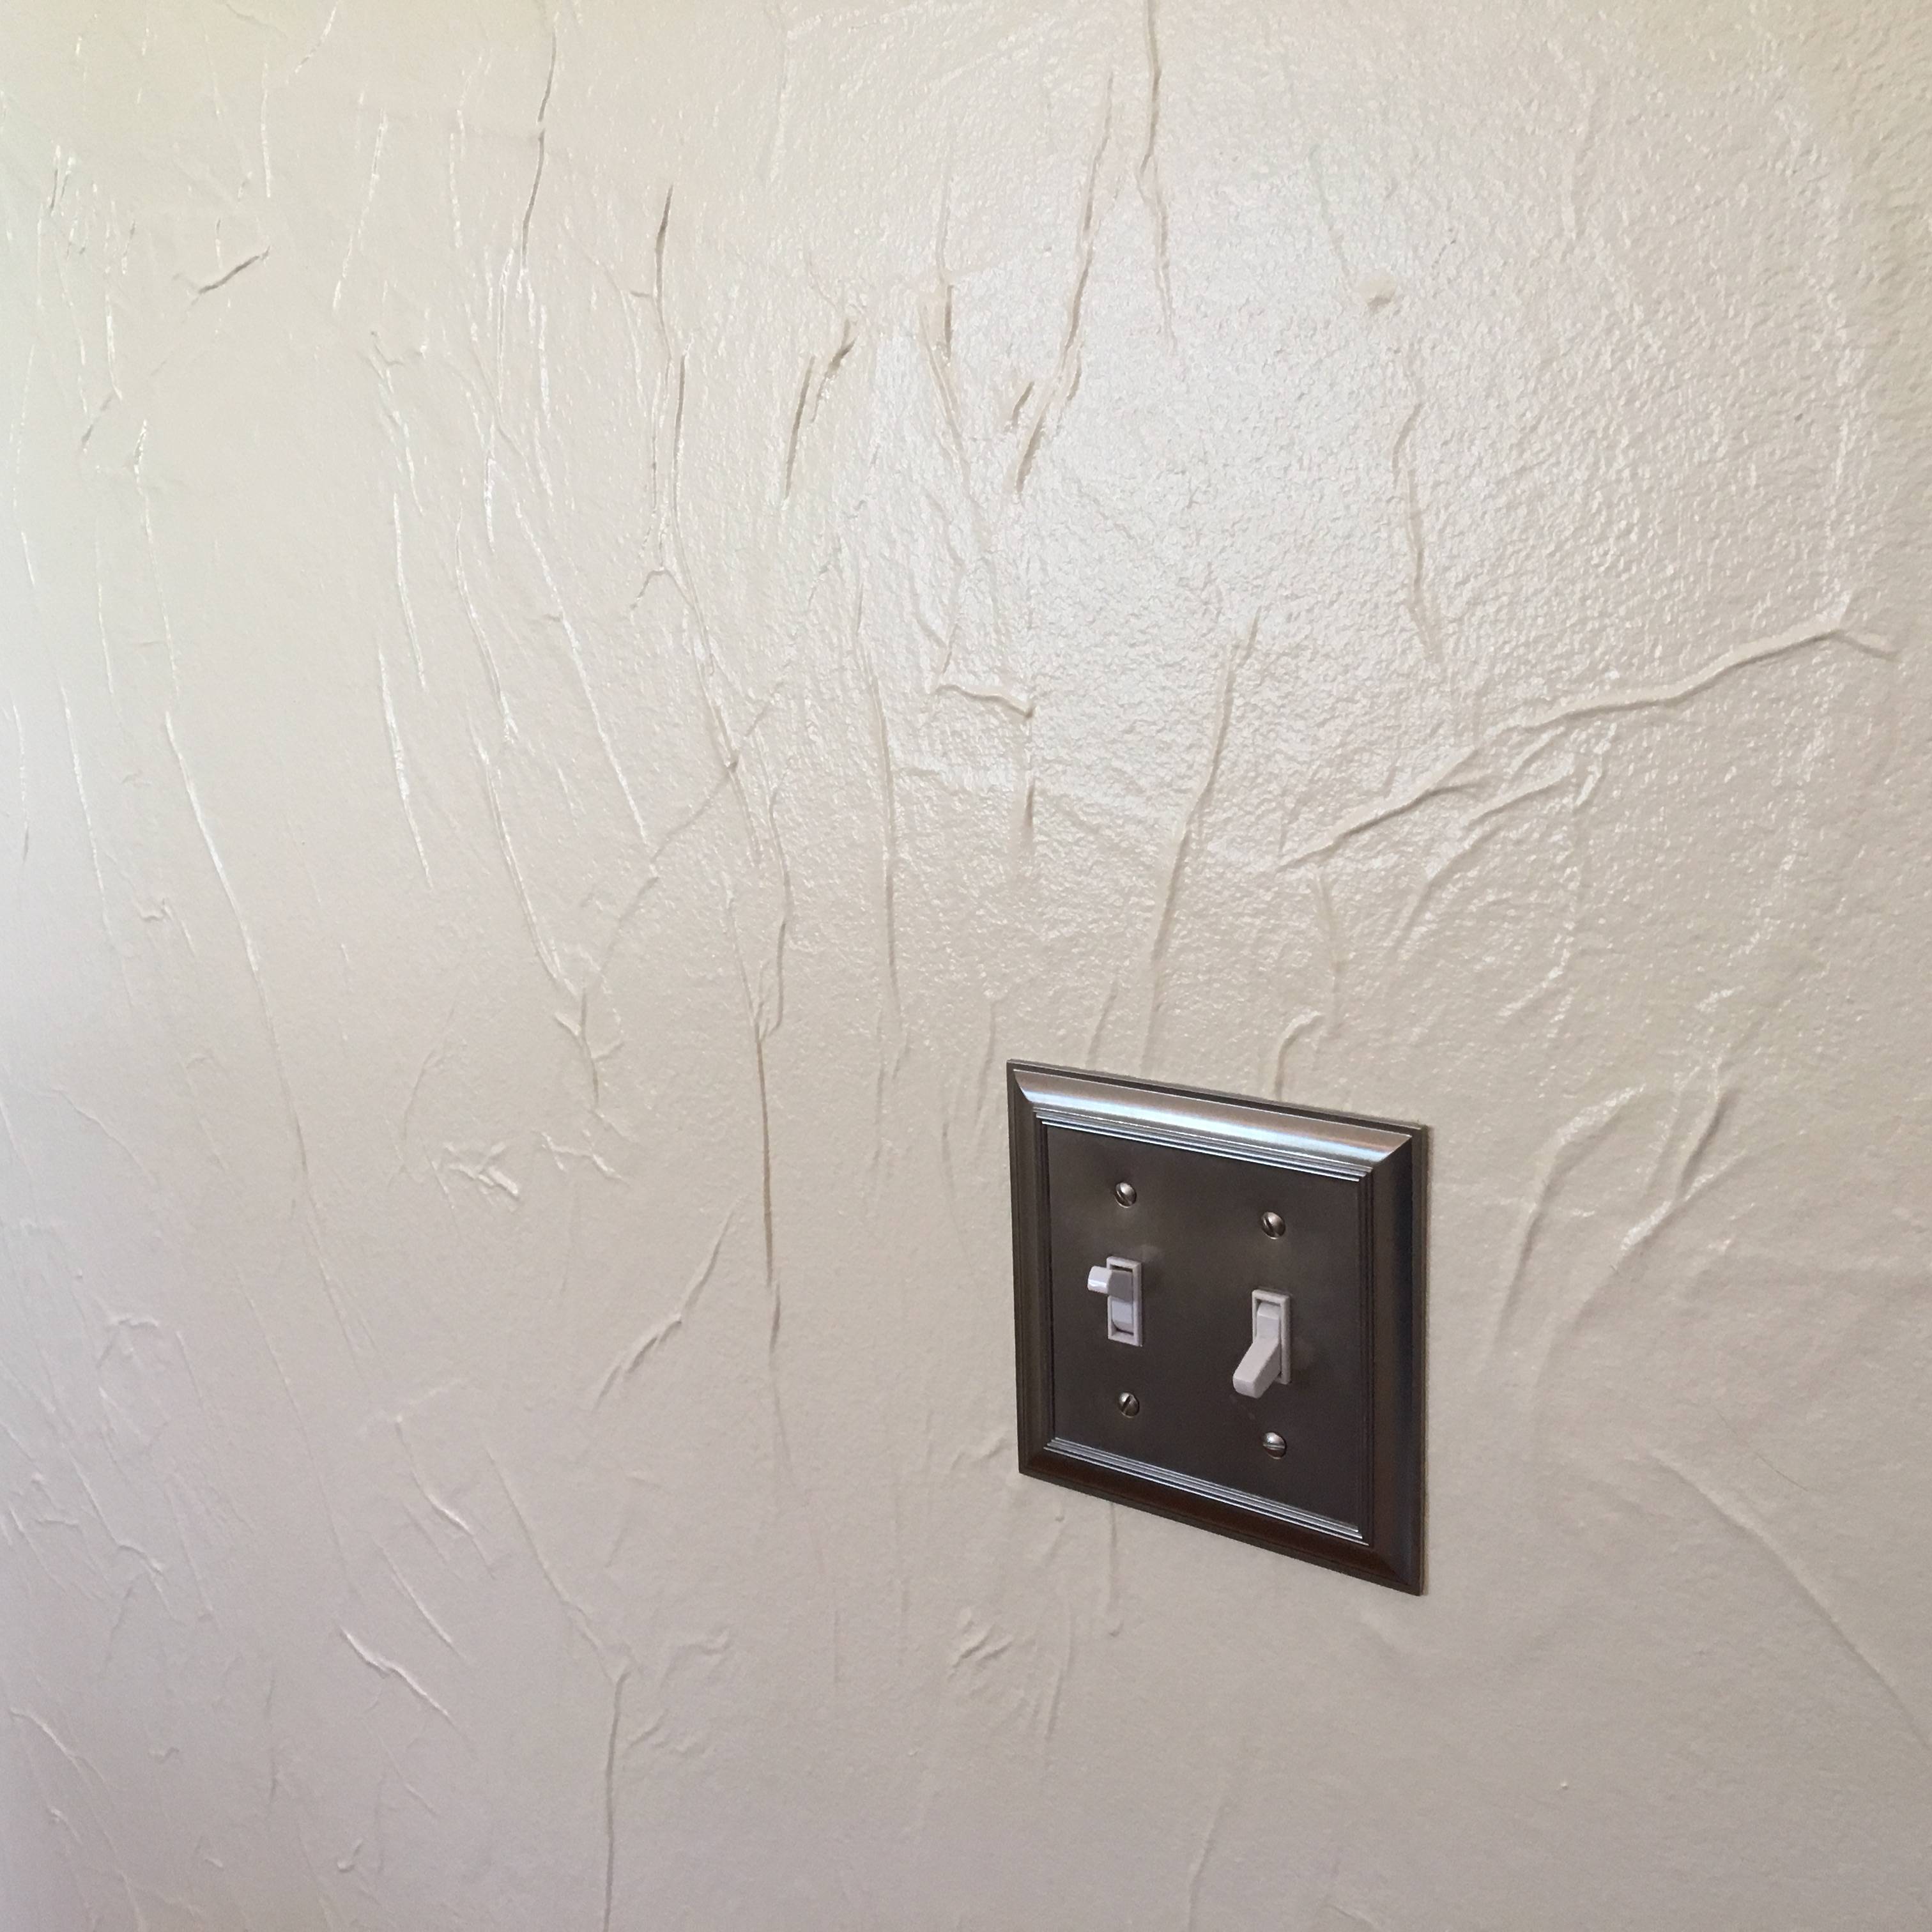 removal - What type of wall texture is this, and how do you remove ...